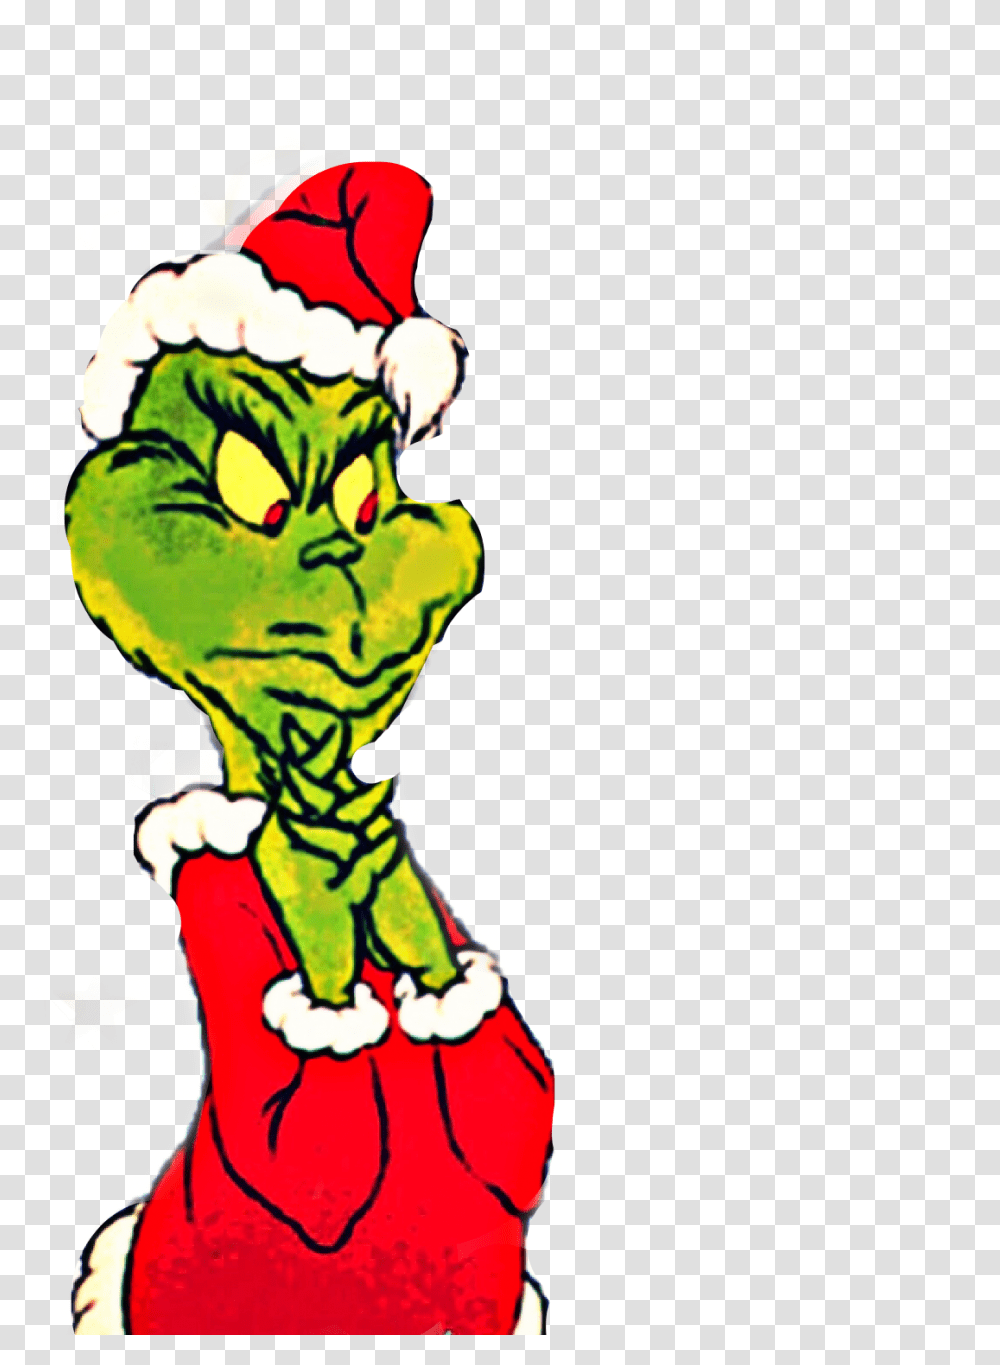 Grinch Grinch Quotes Clipart Full Size Clipart 5563509 Merry Christmas Grinch Wishes, Tiger, Elf, Graphics, Performer Transparent Png